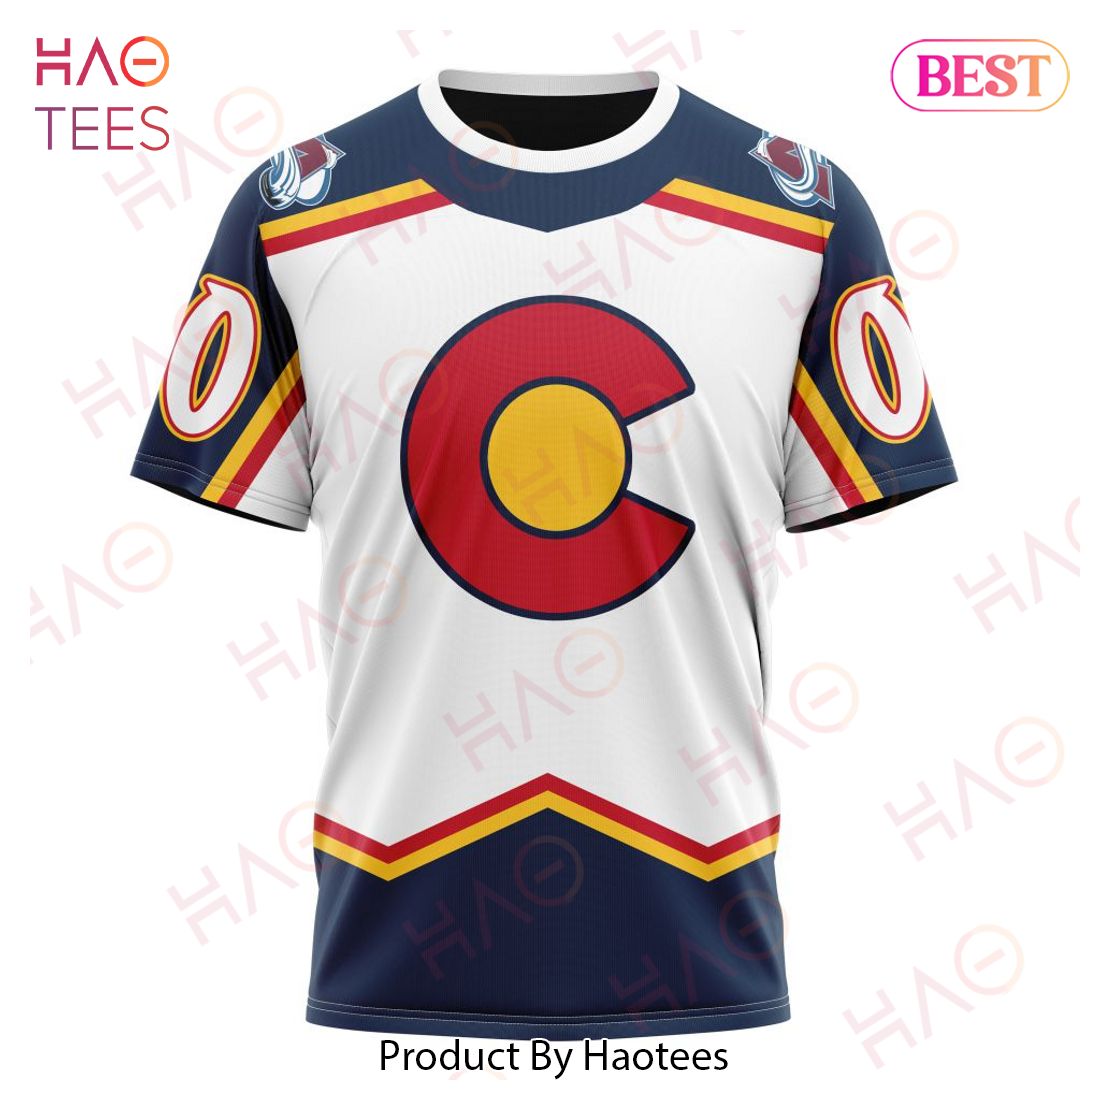 Colorado Avalanche - These Reverse Retros are something special.